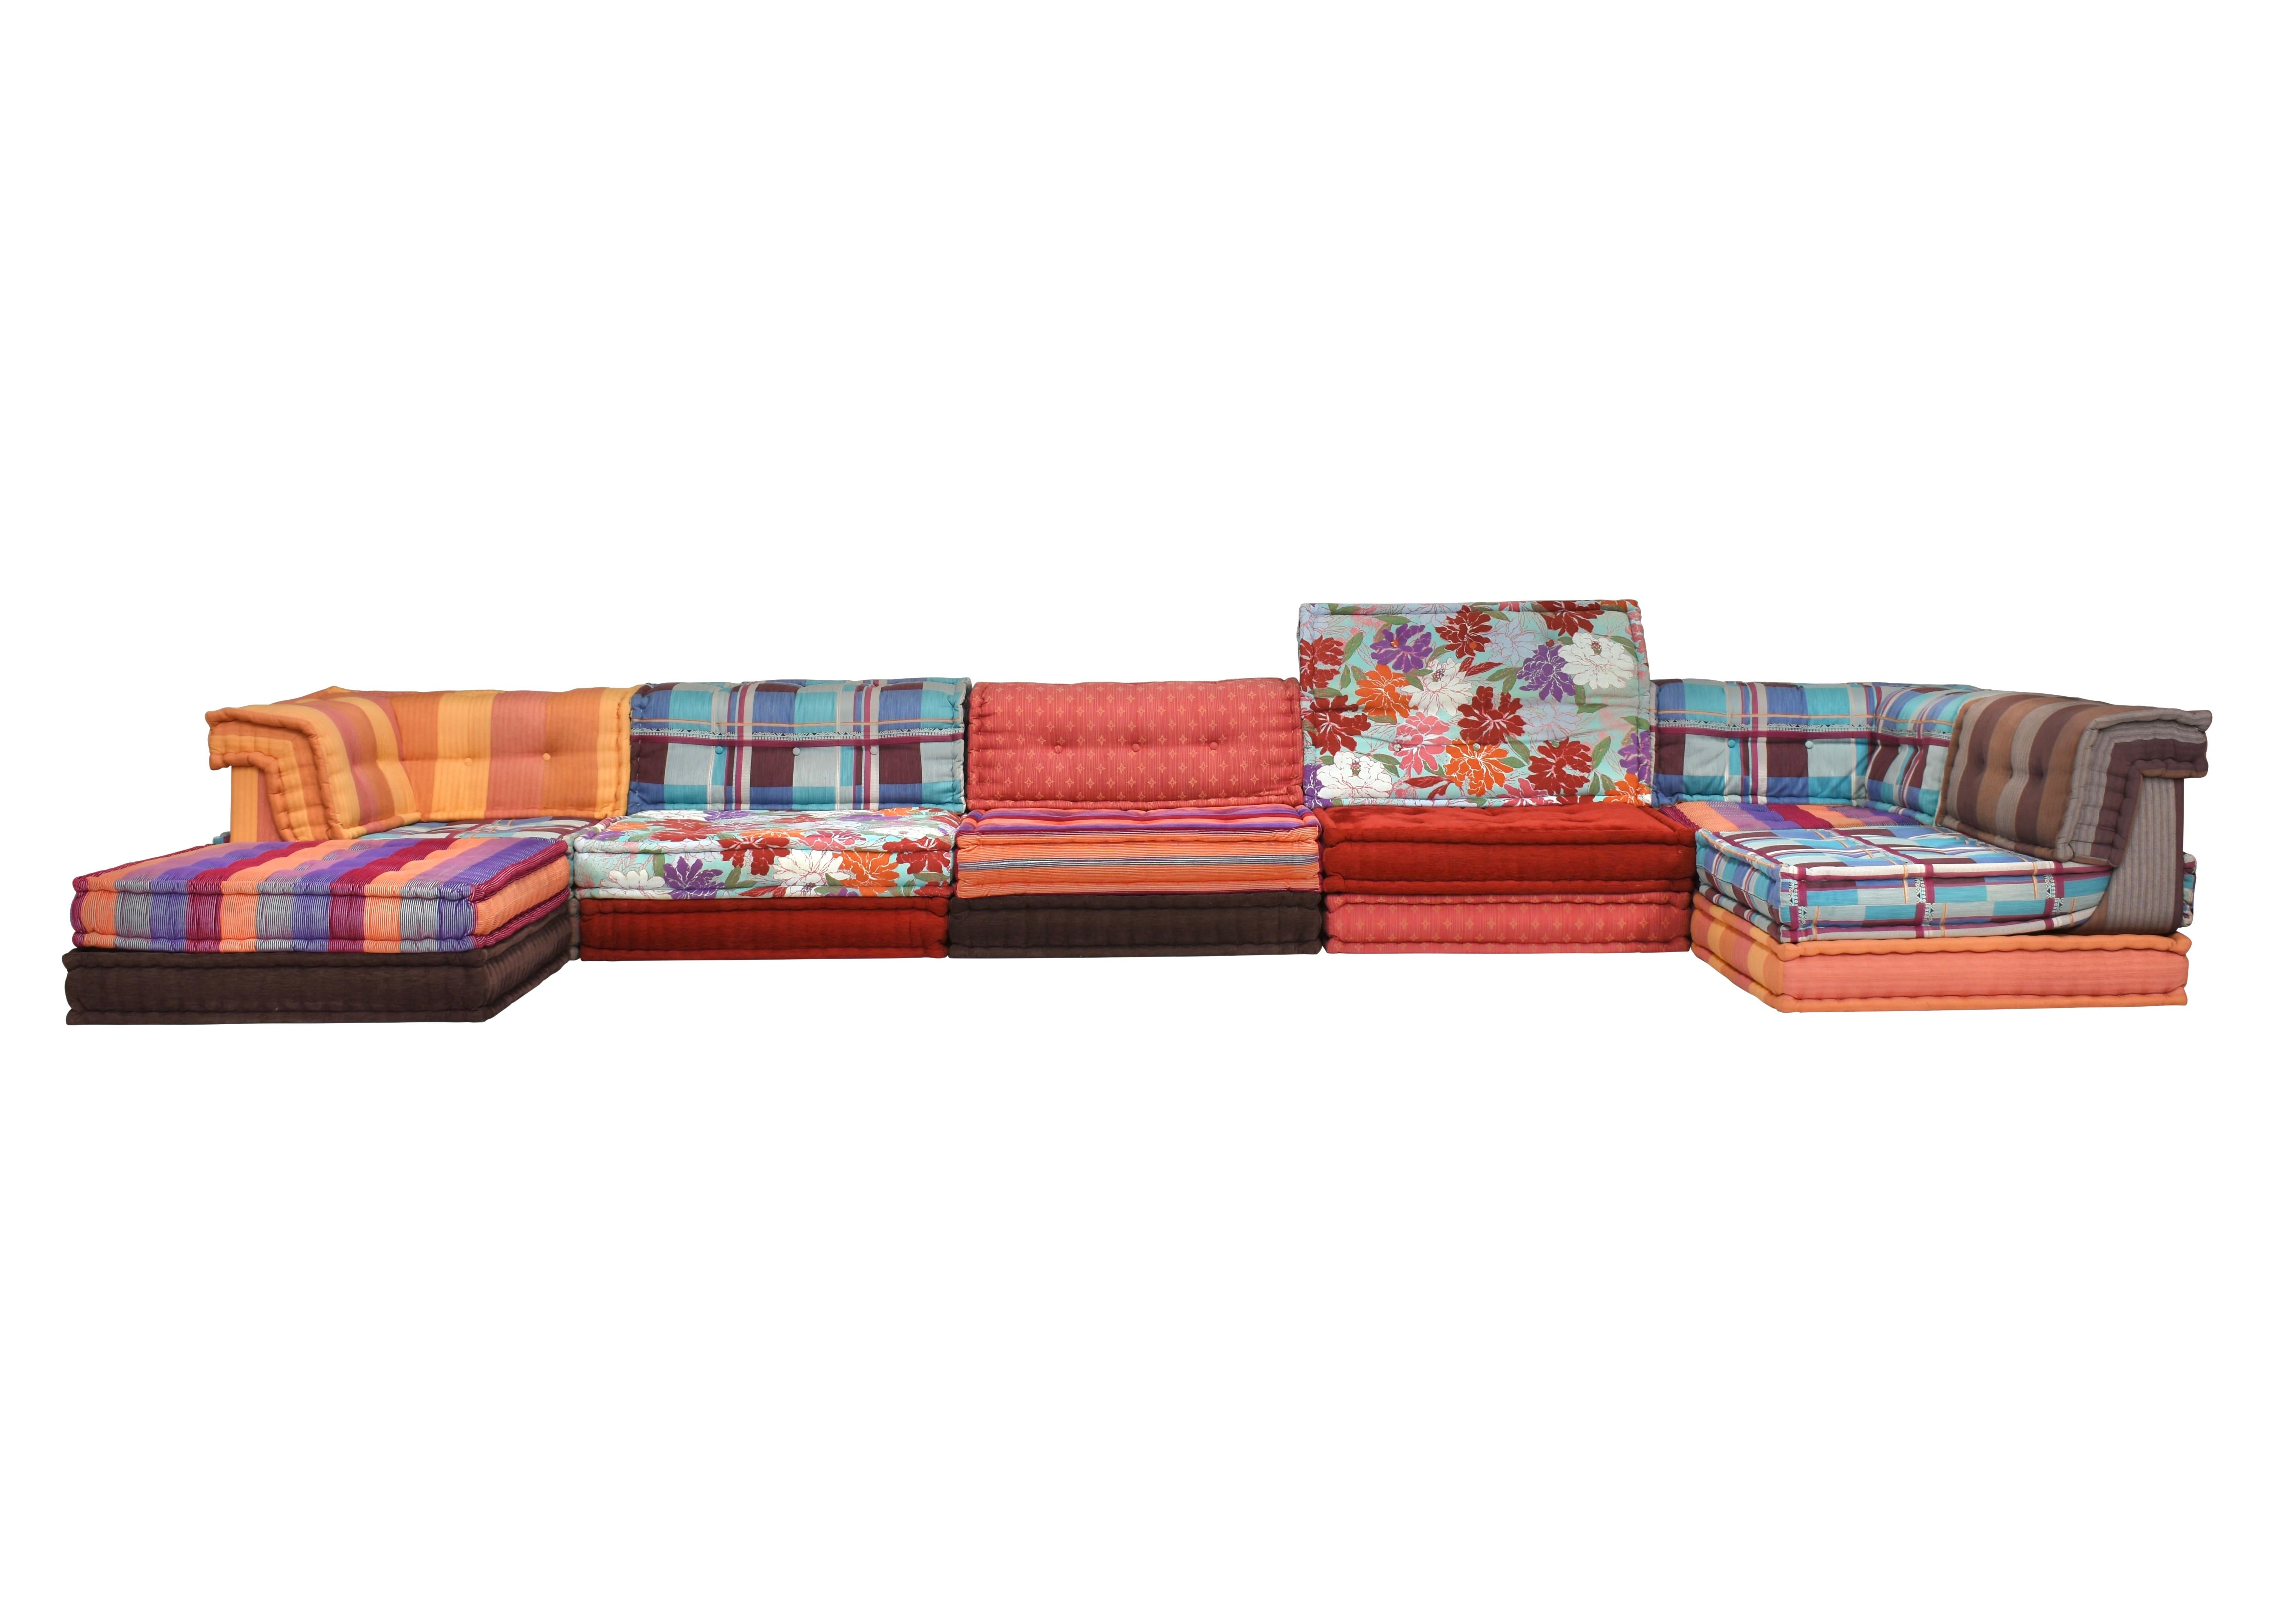 Large Mah Jong sectional sofa in original fabric designed by Hans Hopfer for Roche Bobois in original Missoni fabric. France circa 1970.
Although not necessary for this item we also offer reupholstery service on request. The damages in the pictures